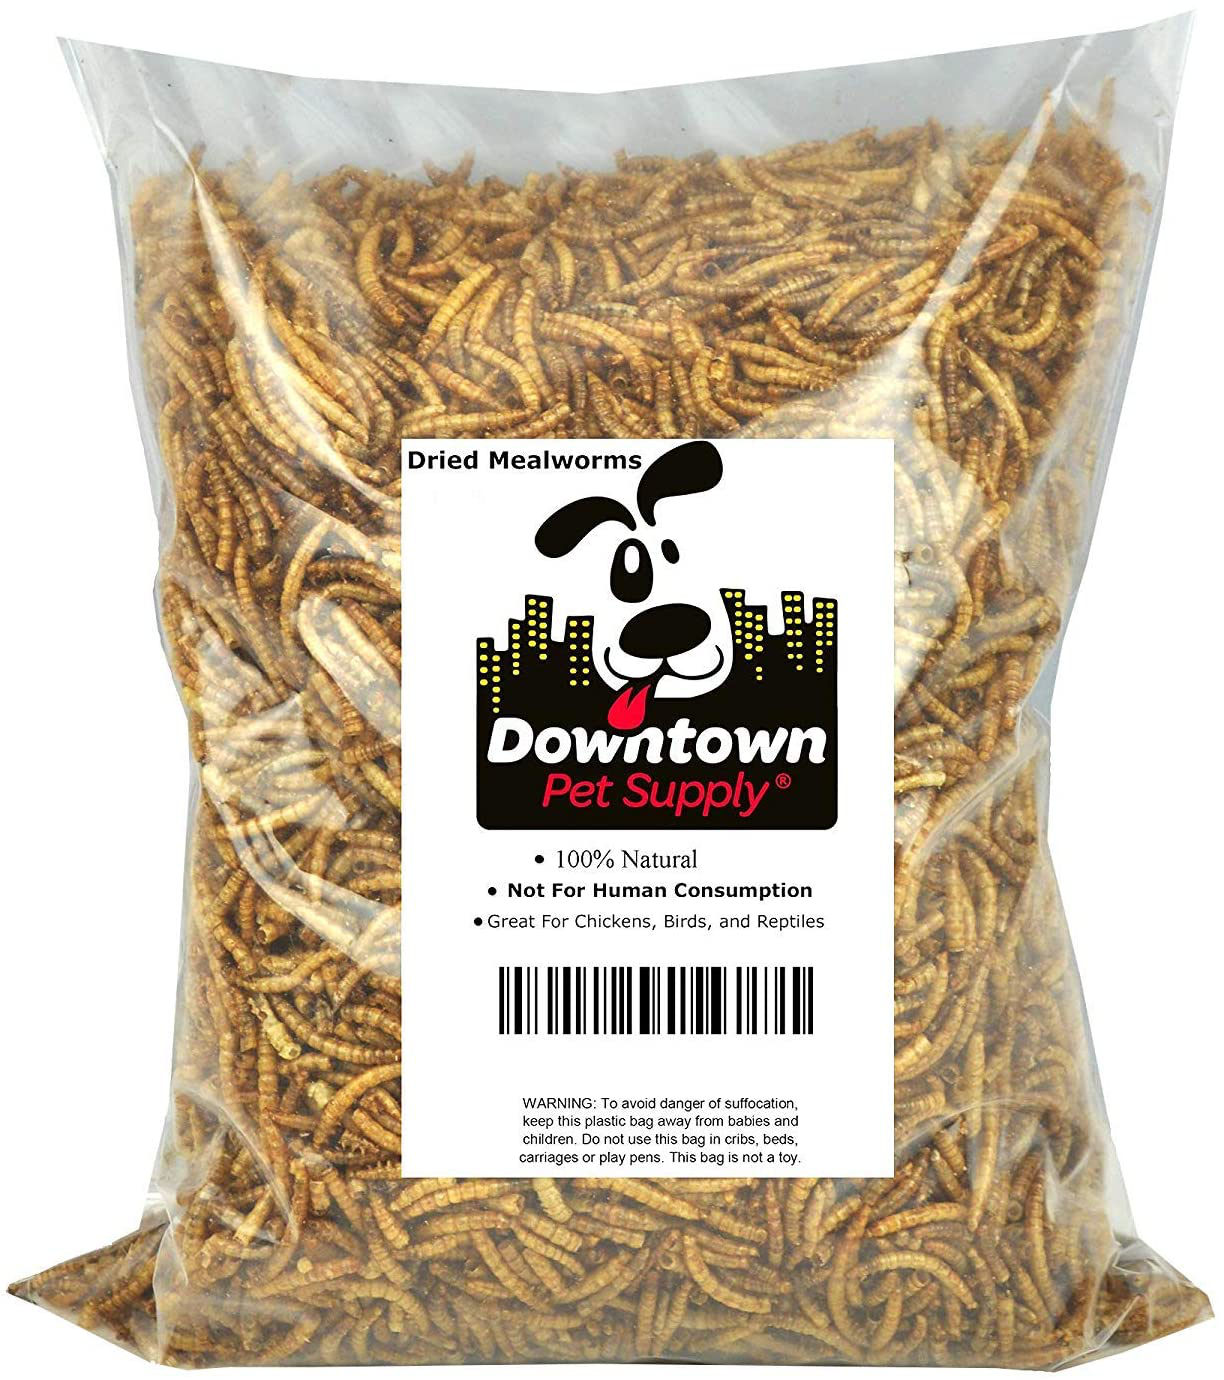 Downtown Pet Supply Dried Mealworms 100% Natural Treats for Wild Birds, Chickens, Reptiles, Fish - Food for Birds, Turkeys Animals & Pet Supplies > Pet Supplies > Bird Supplies > Bird Treats Downtown Pet Supply 1 Pound (Pack of 1)  